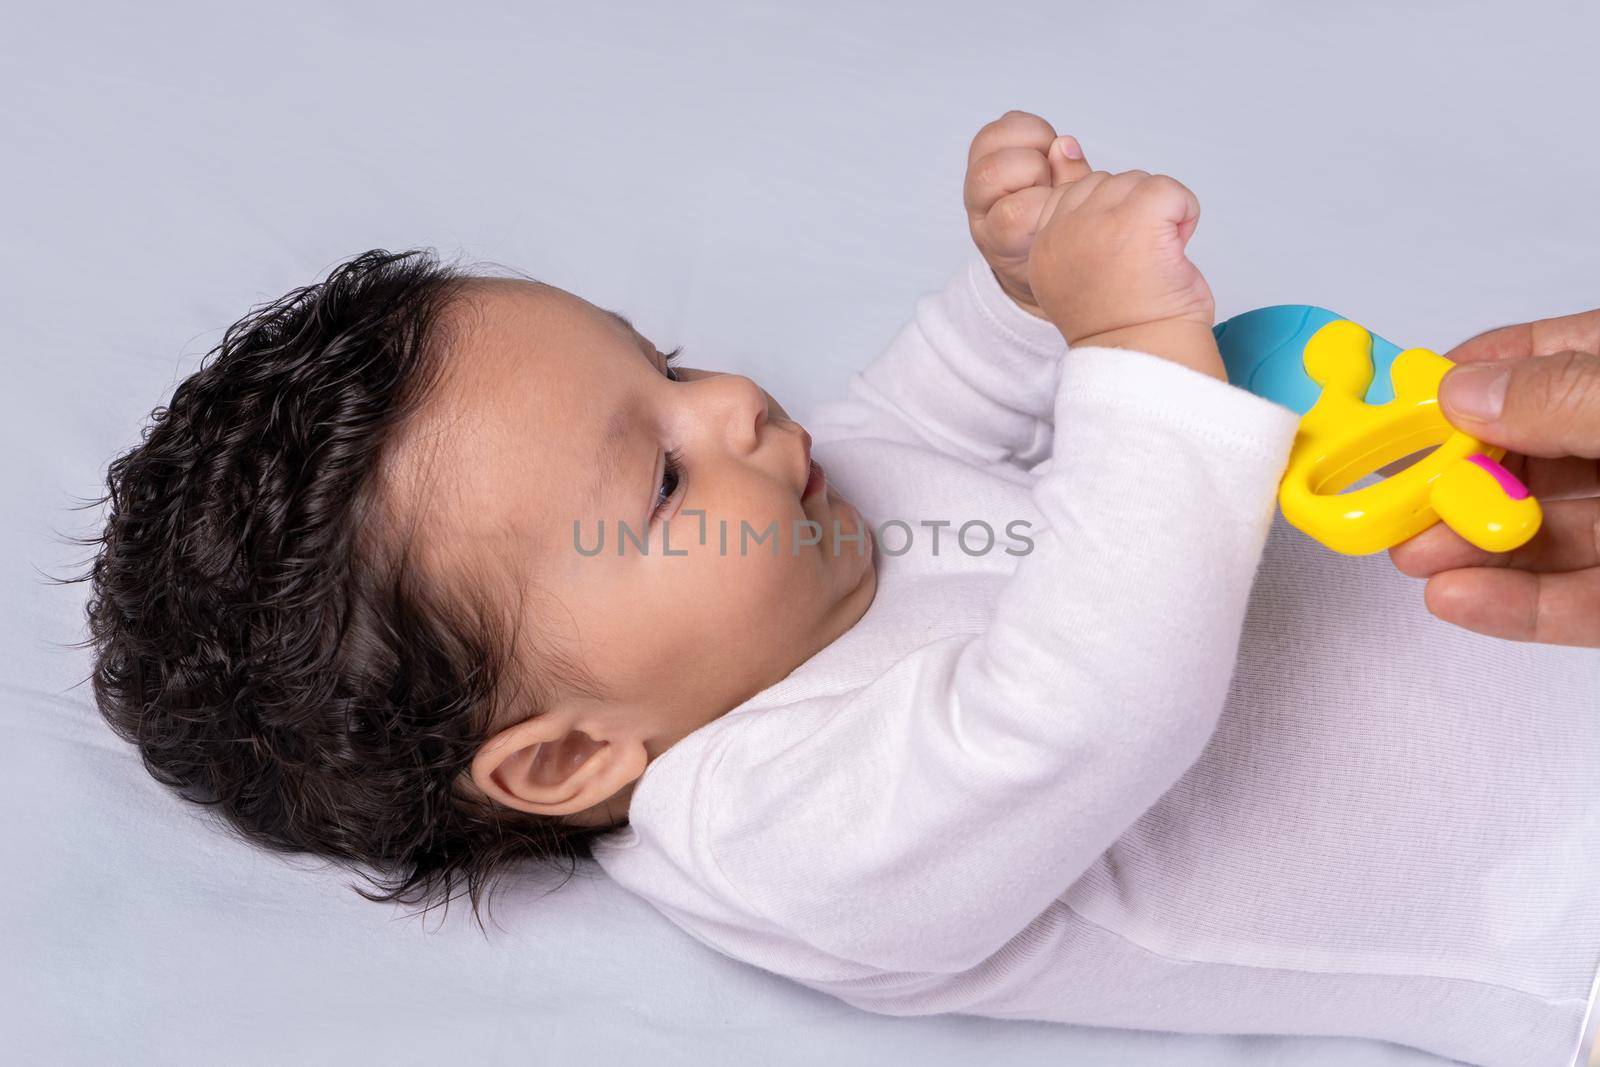 Infant lying on his back with his hands up trying to grab a toy